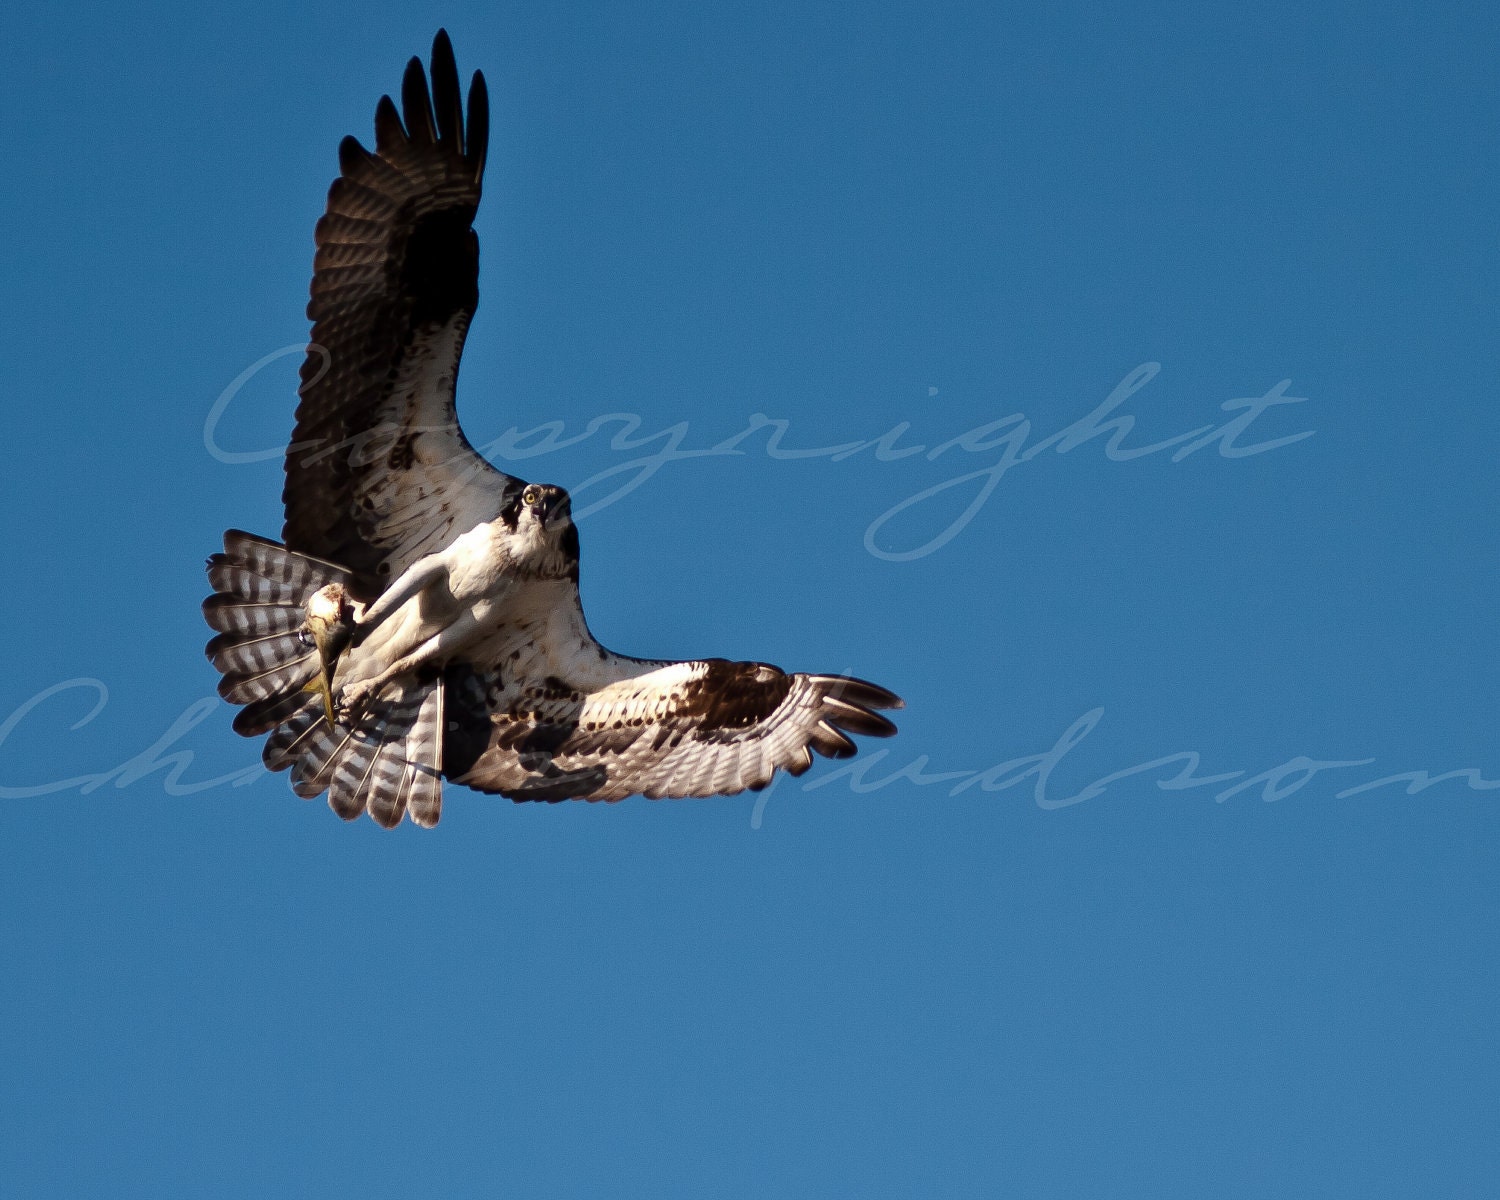 Osprey and fish,  8x10 fine art matted and signed print.